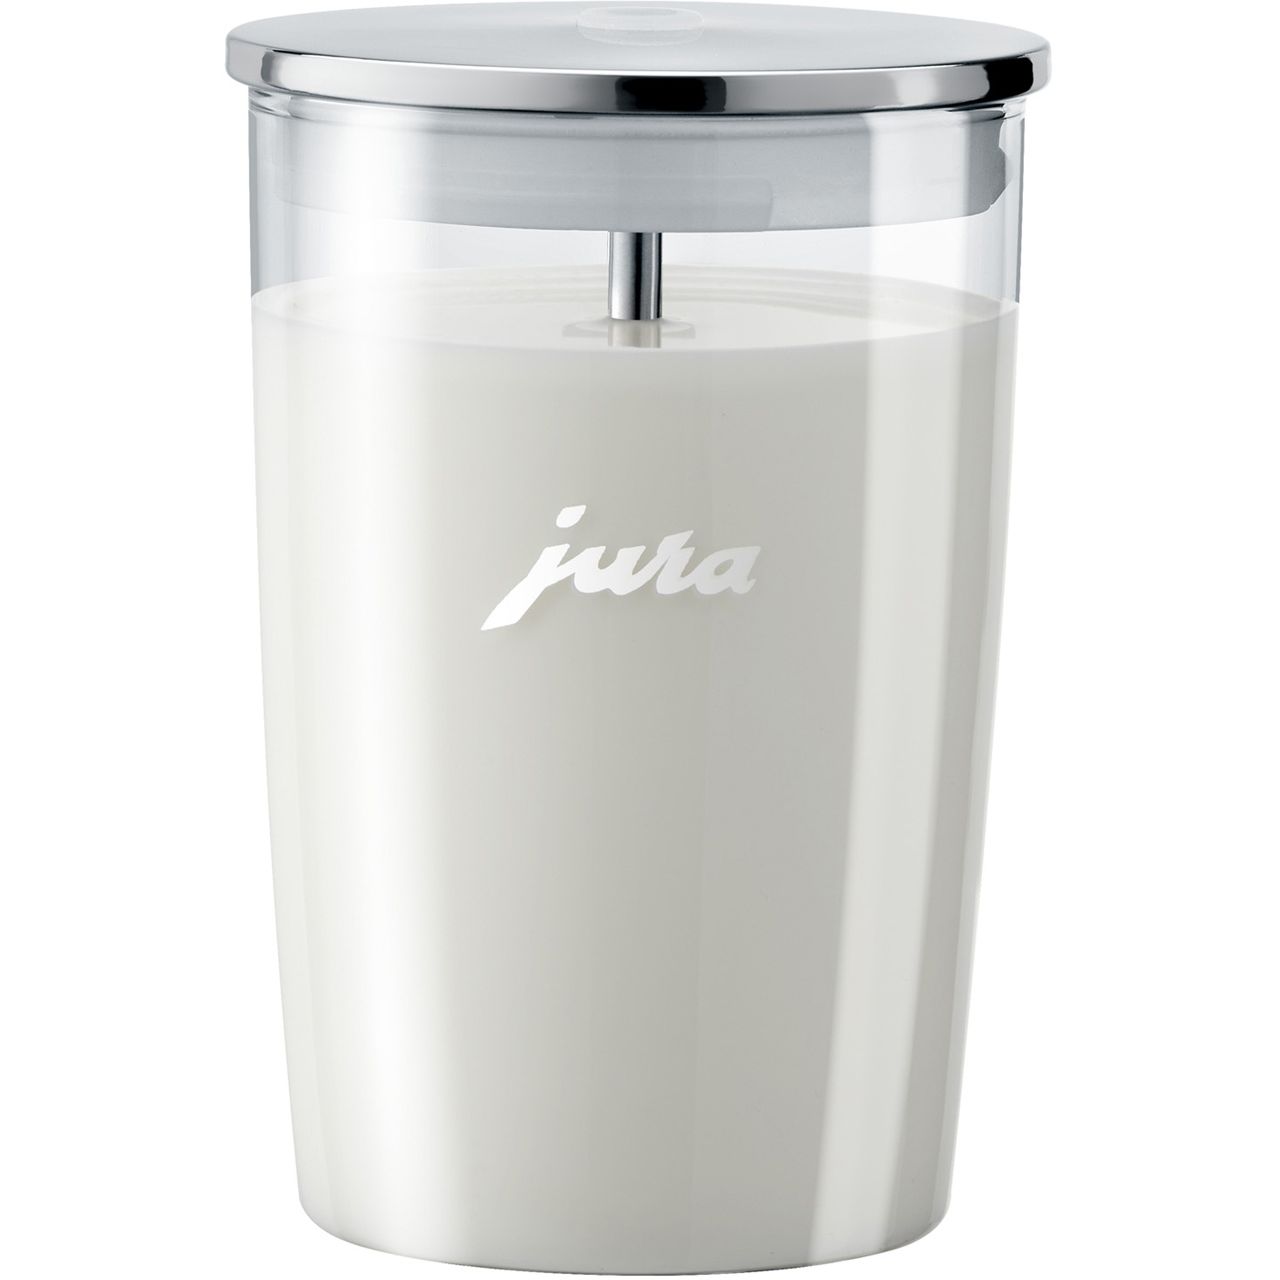 Jura 72570 Milk Container Review